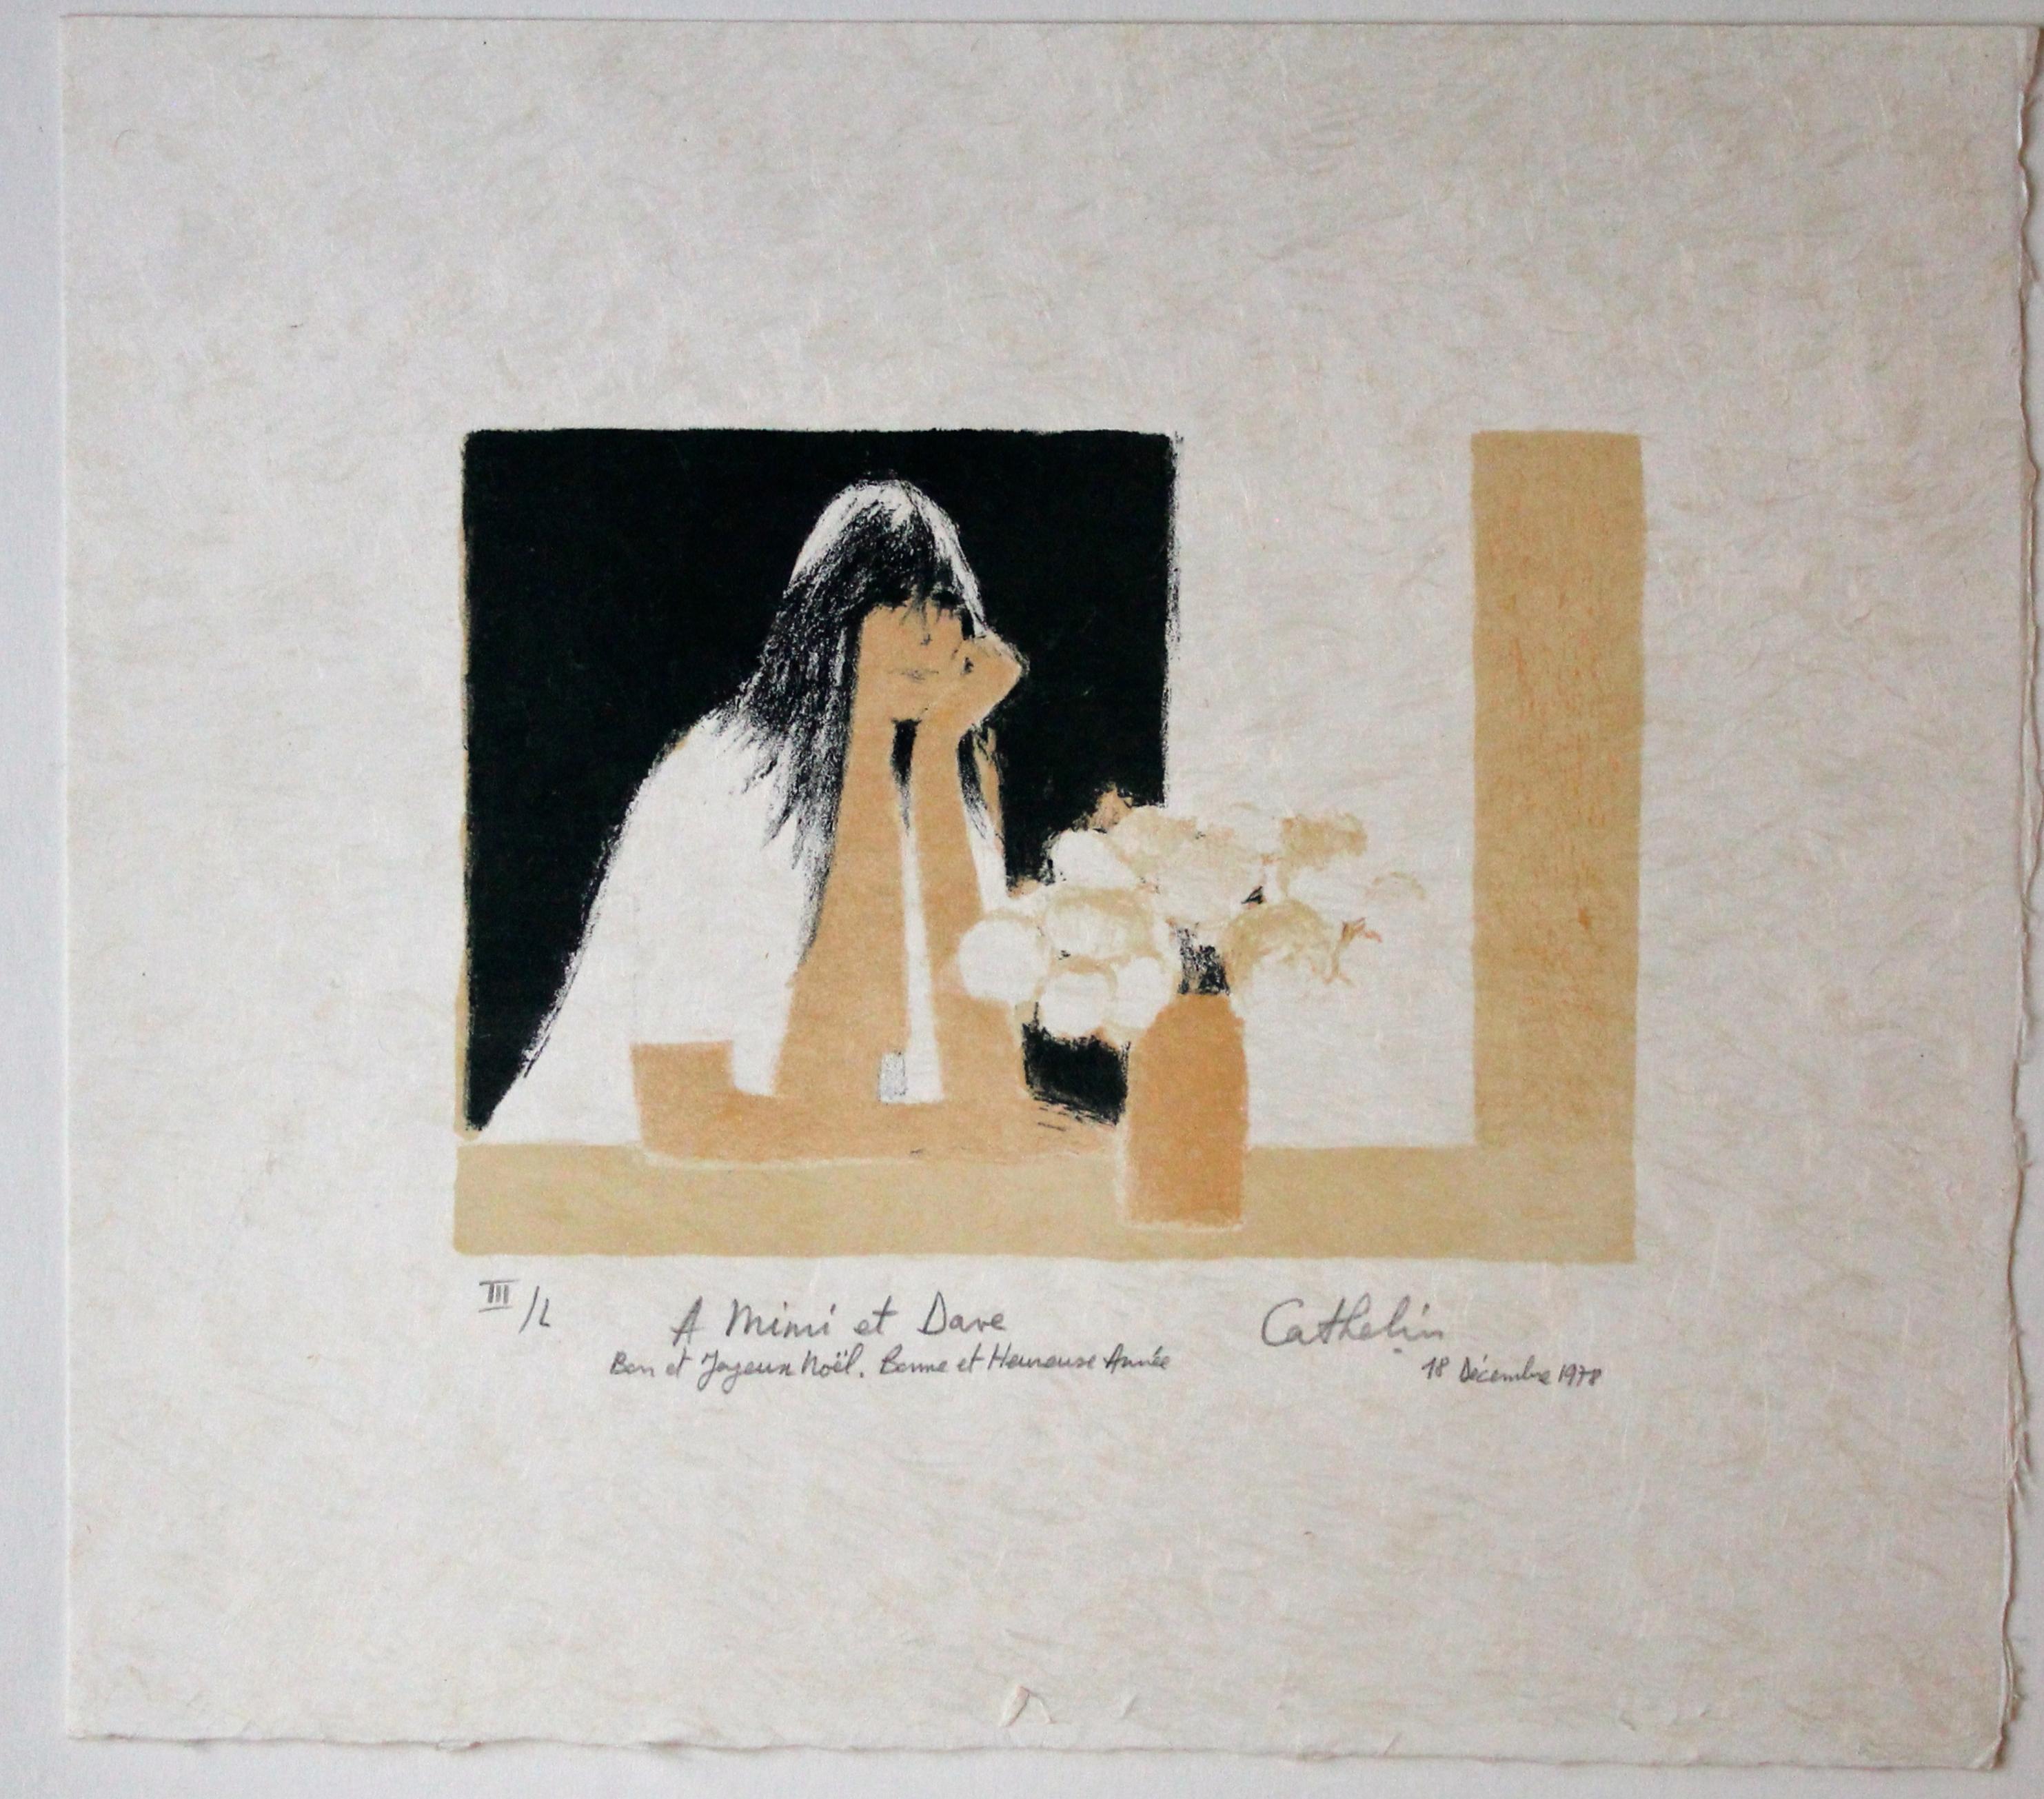 Beautiful decorative original print by the famous French painter Bernard Cathelin (1919-2004). Printed in 1978 in an edition of 125-oue print is an artist's proof E.A. especially annotated to the artists American dealer David Finlay. Paper size: 14